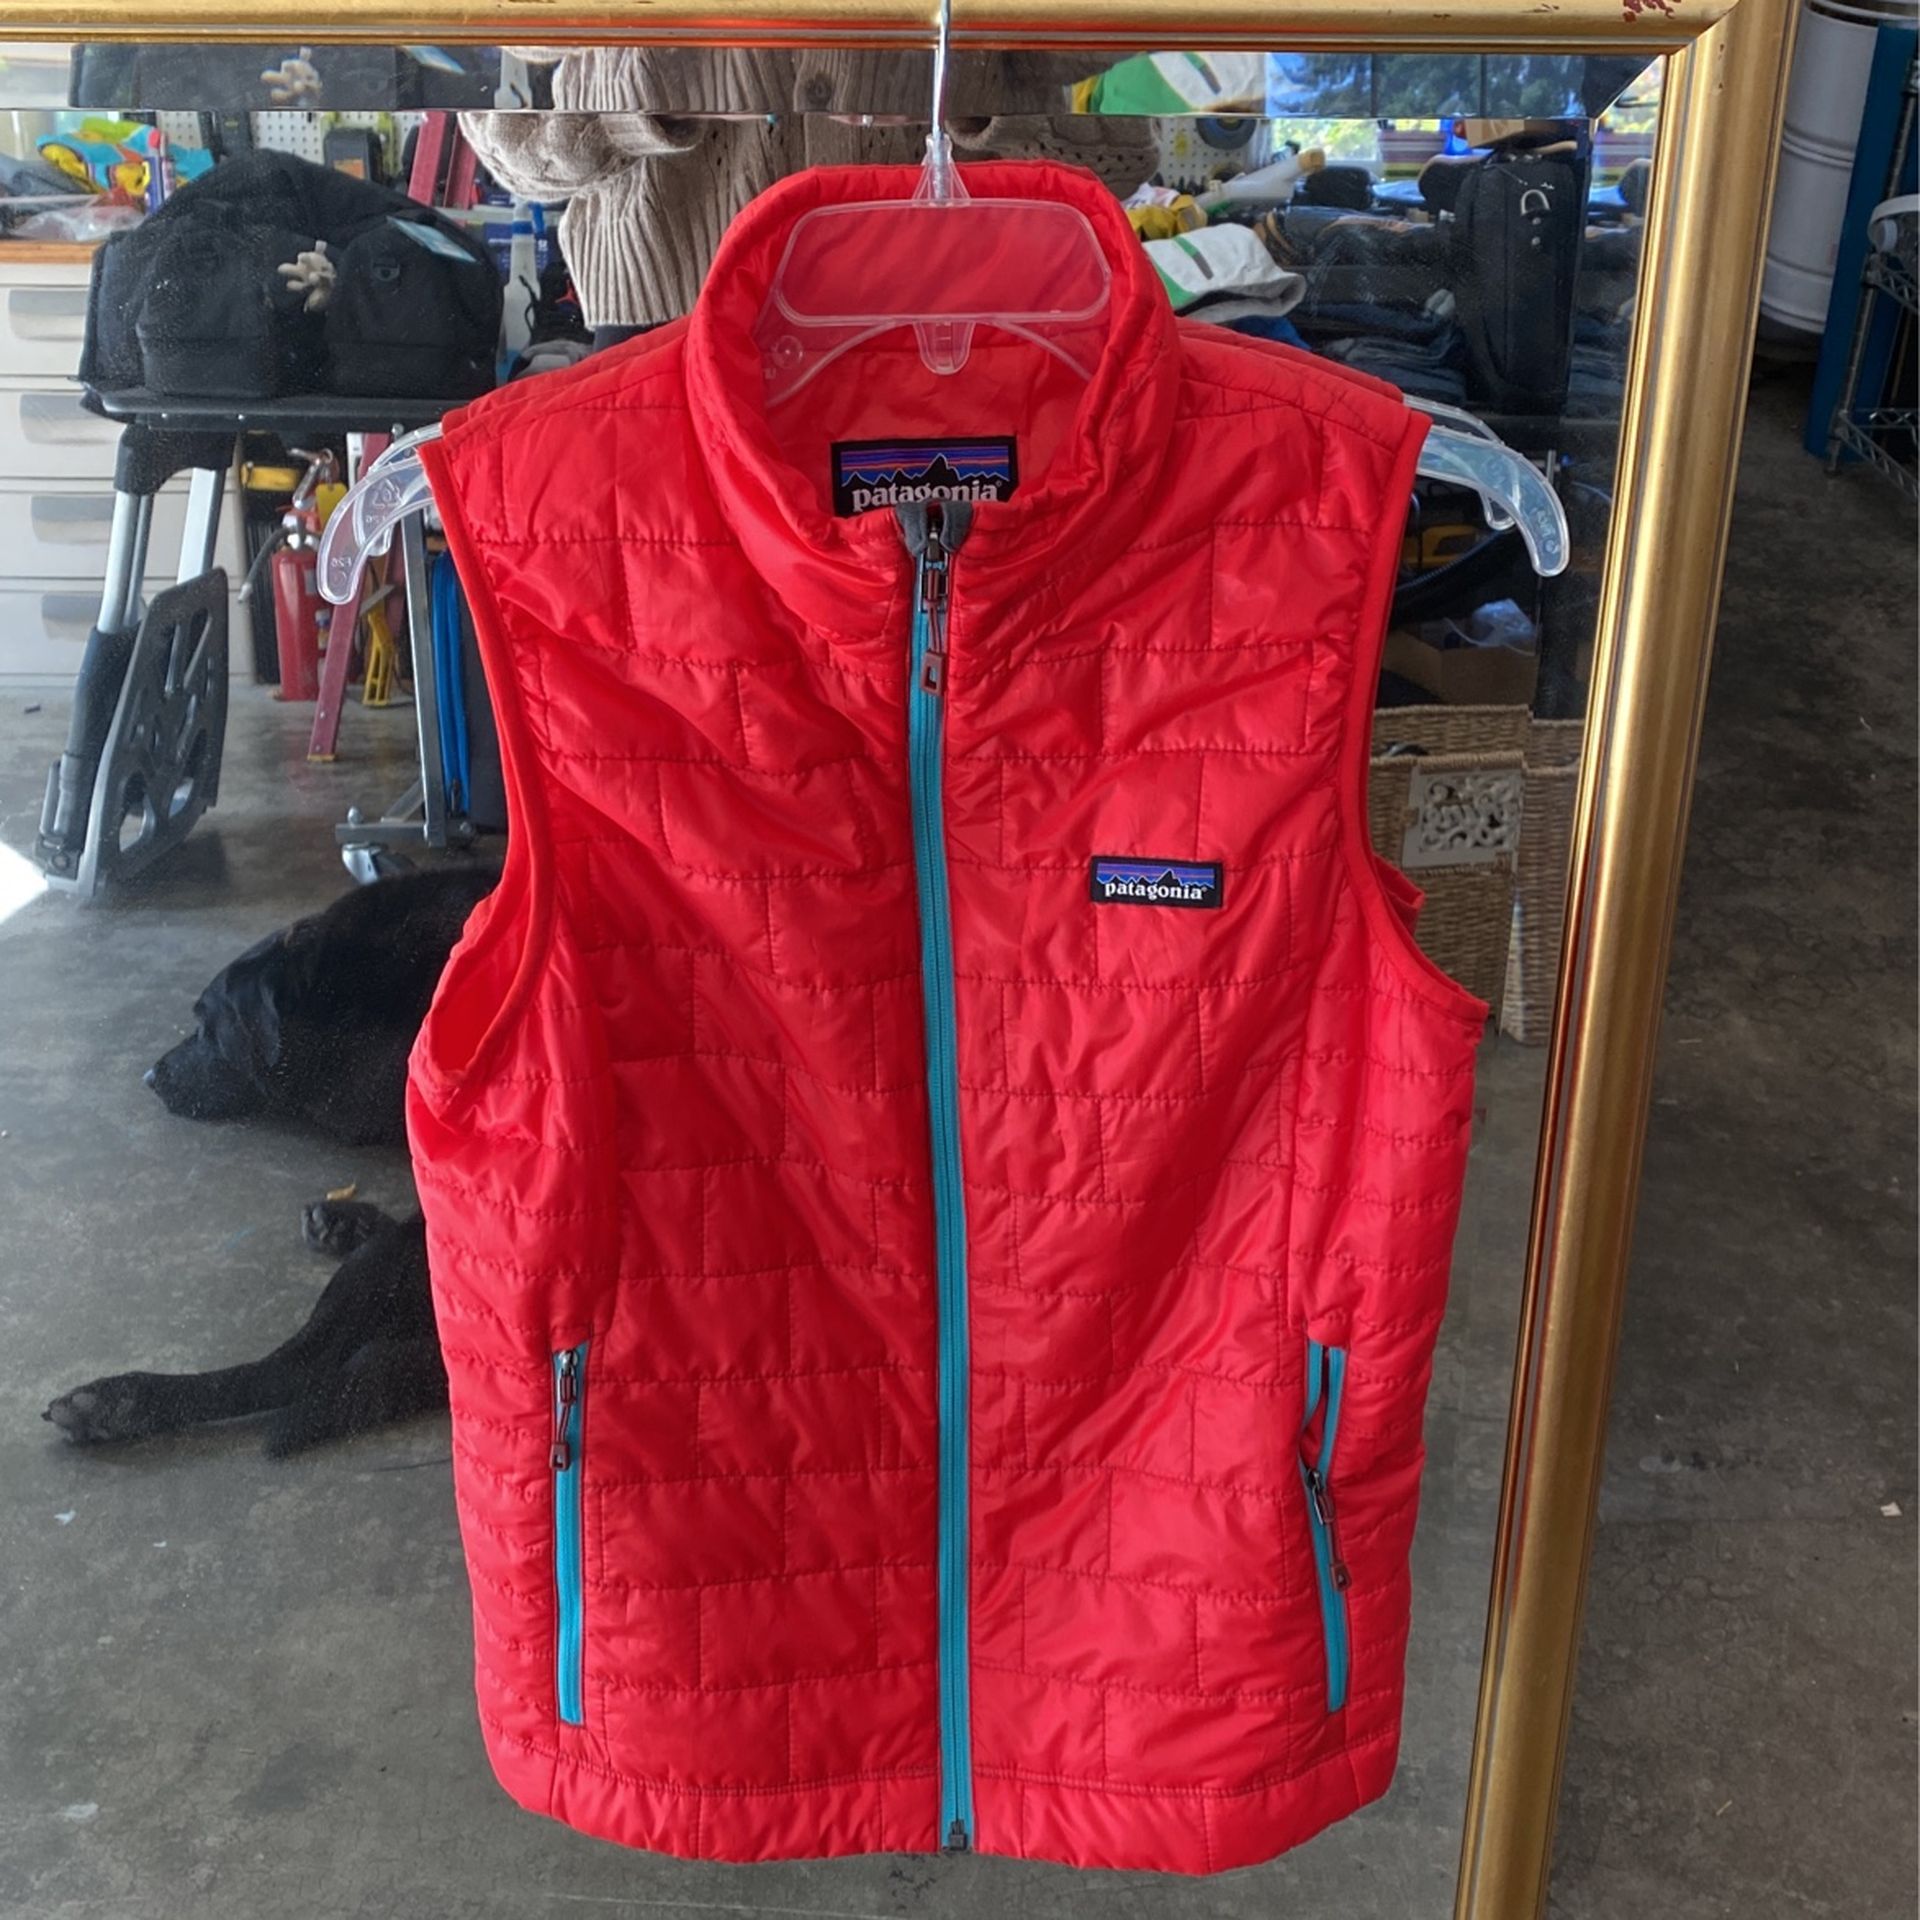 Women’s Small Patagonia Vest